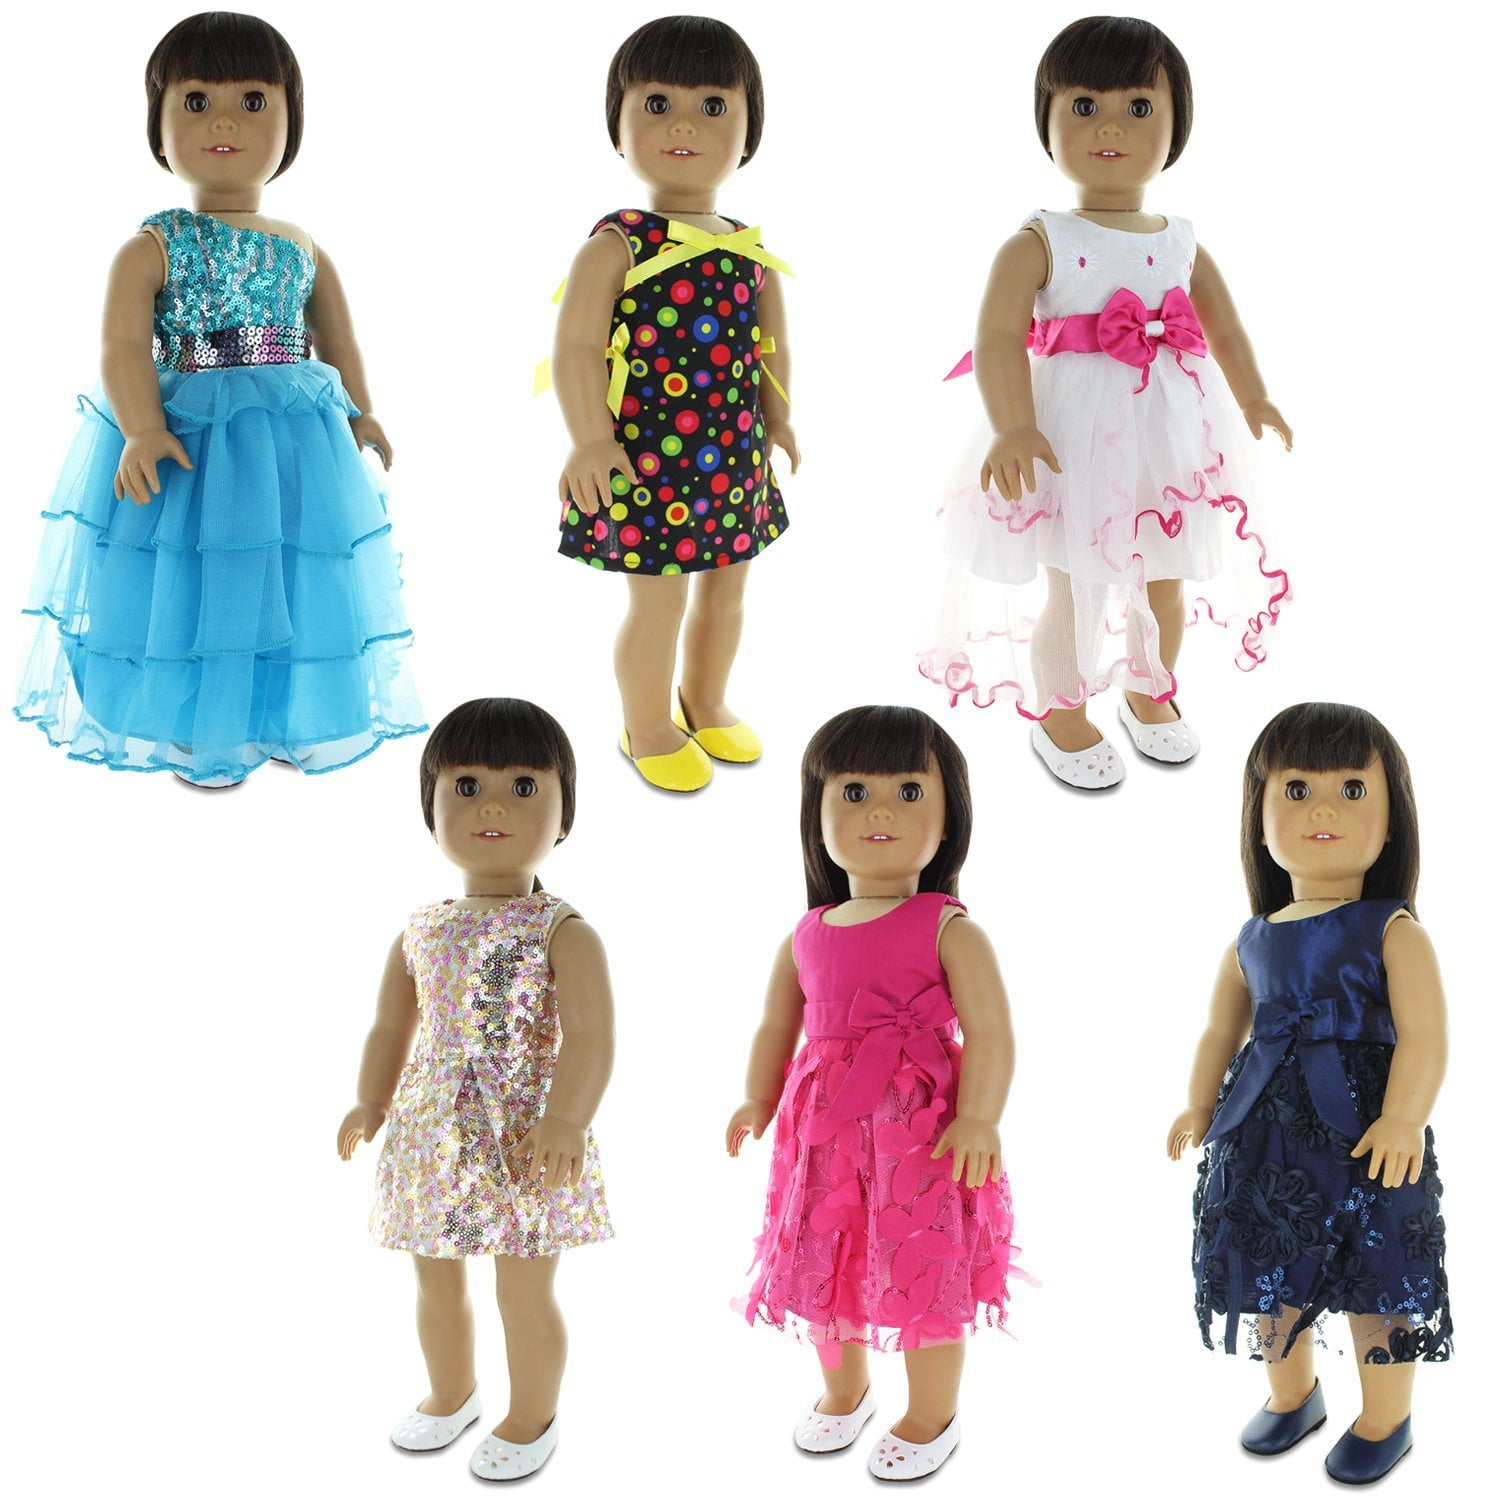 Our Generation Doll My Life Doll Ecore Fun 10 Sets 18 Inch Doll Clothes Outfits Pajamas Dresses Hair Clips for American 18 Inch Girl Doll